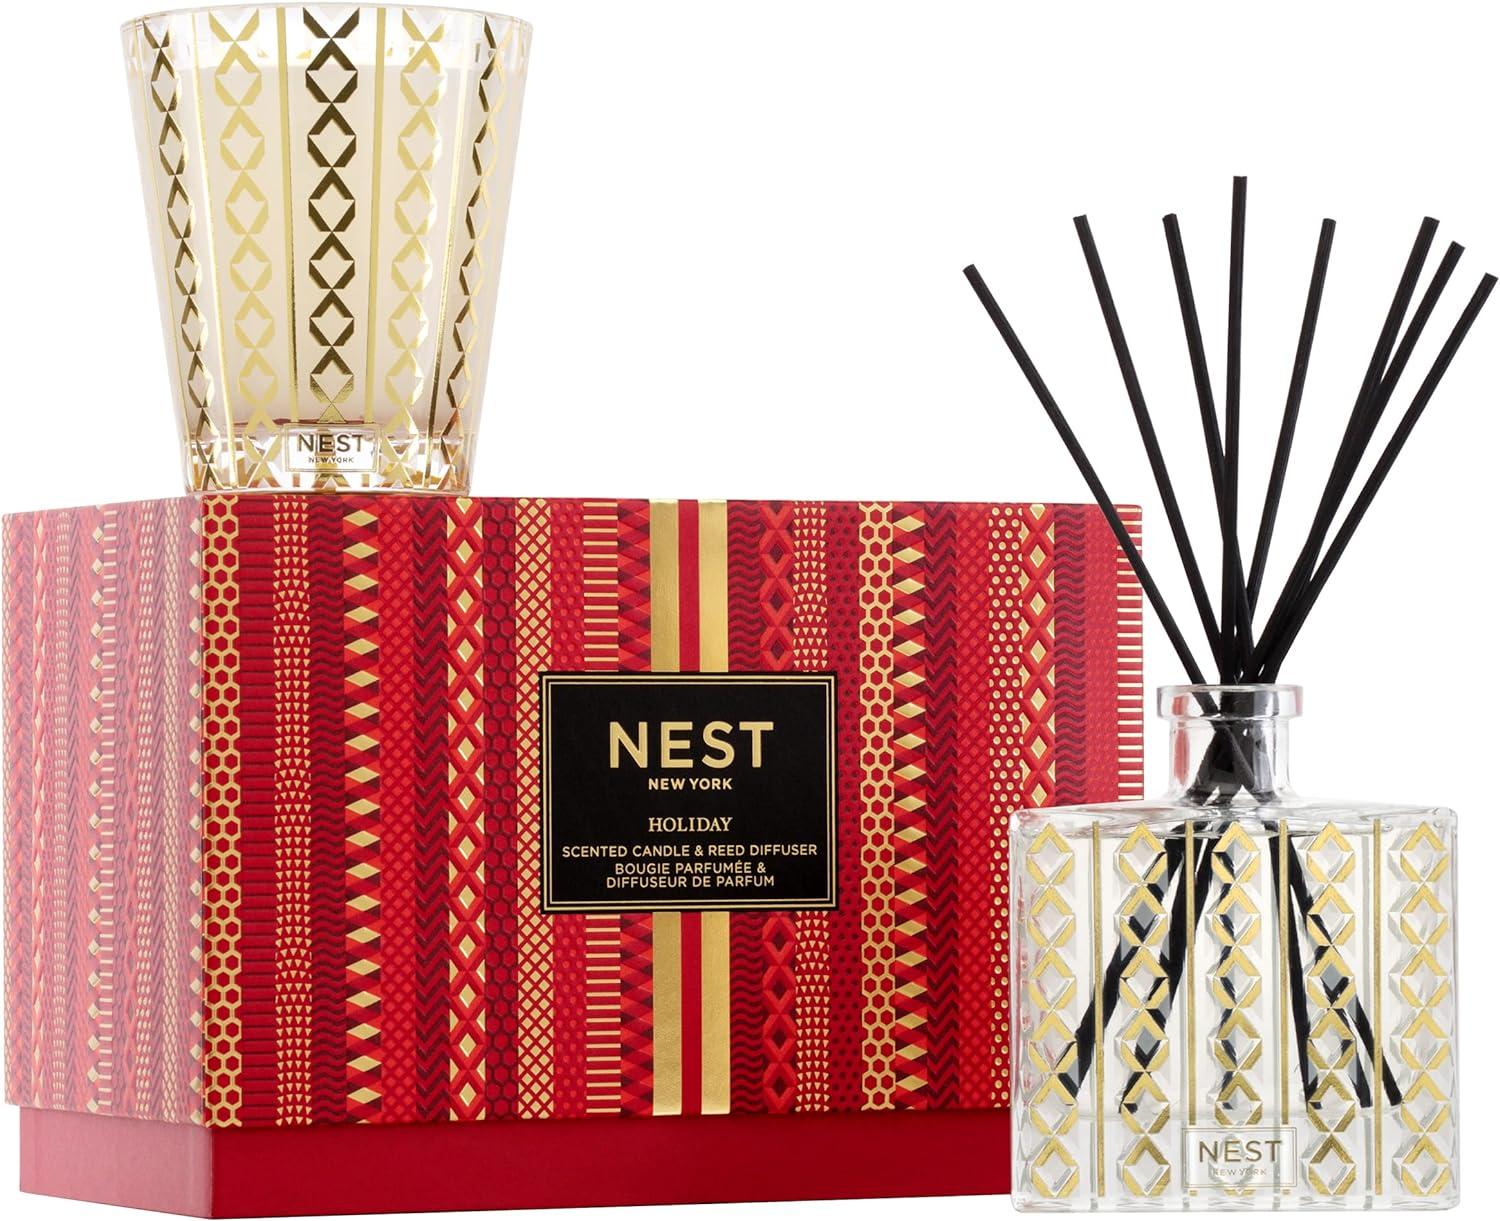 Festive Holiday Scented Candle & Reed Diffuser Set, 175ml